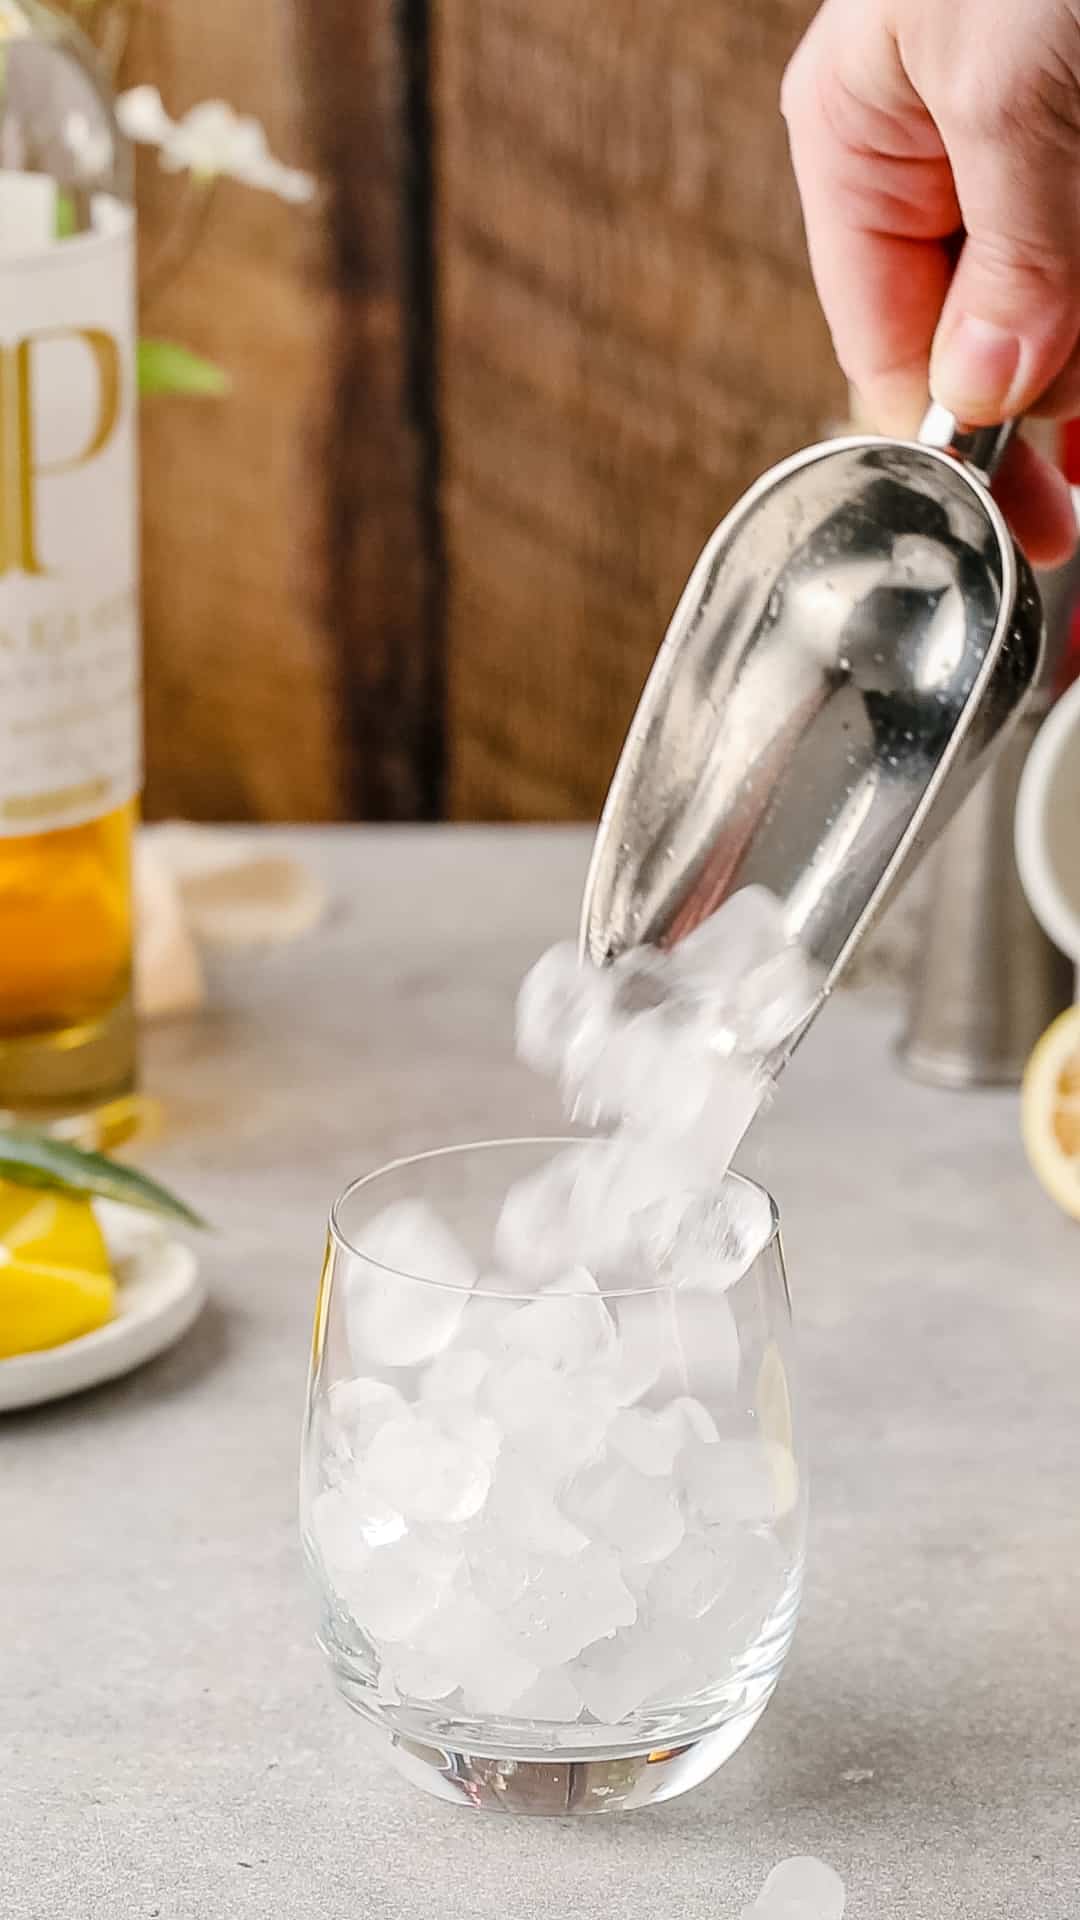 Adding ice to a cocktail serving glass using a metal ice scoop.